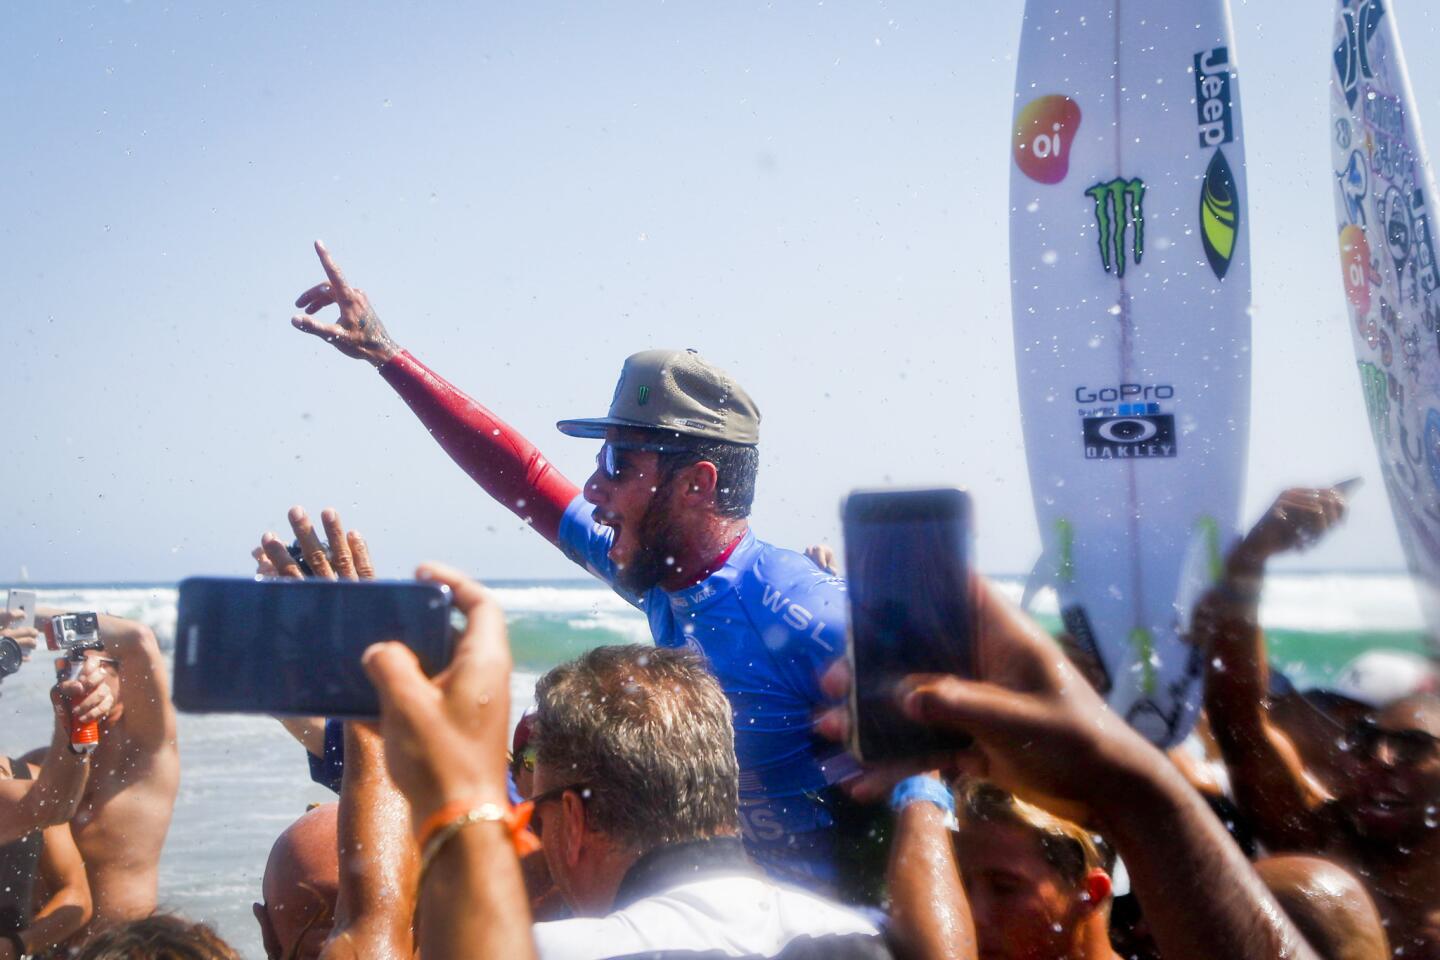 Filipe Toledo celebrates with fans after winning the men's title at the 2016 U.S. Open of Surfing in Huntingon Beach on Sunday.